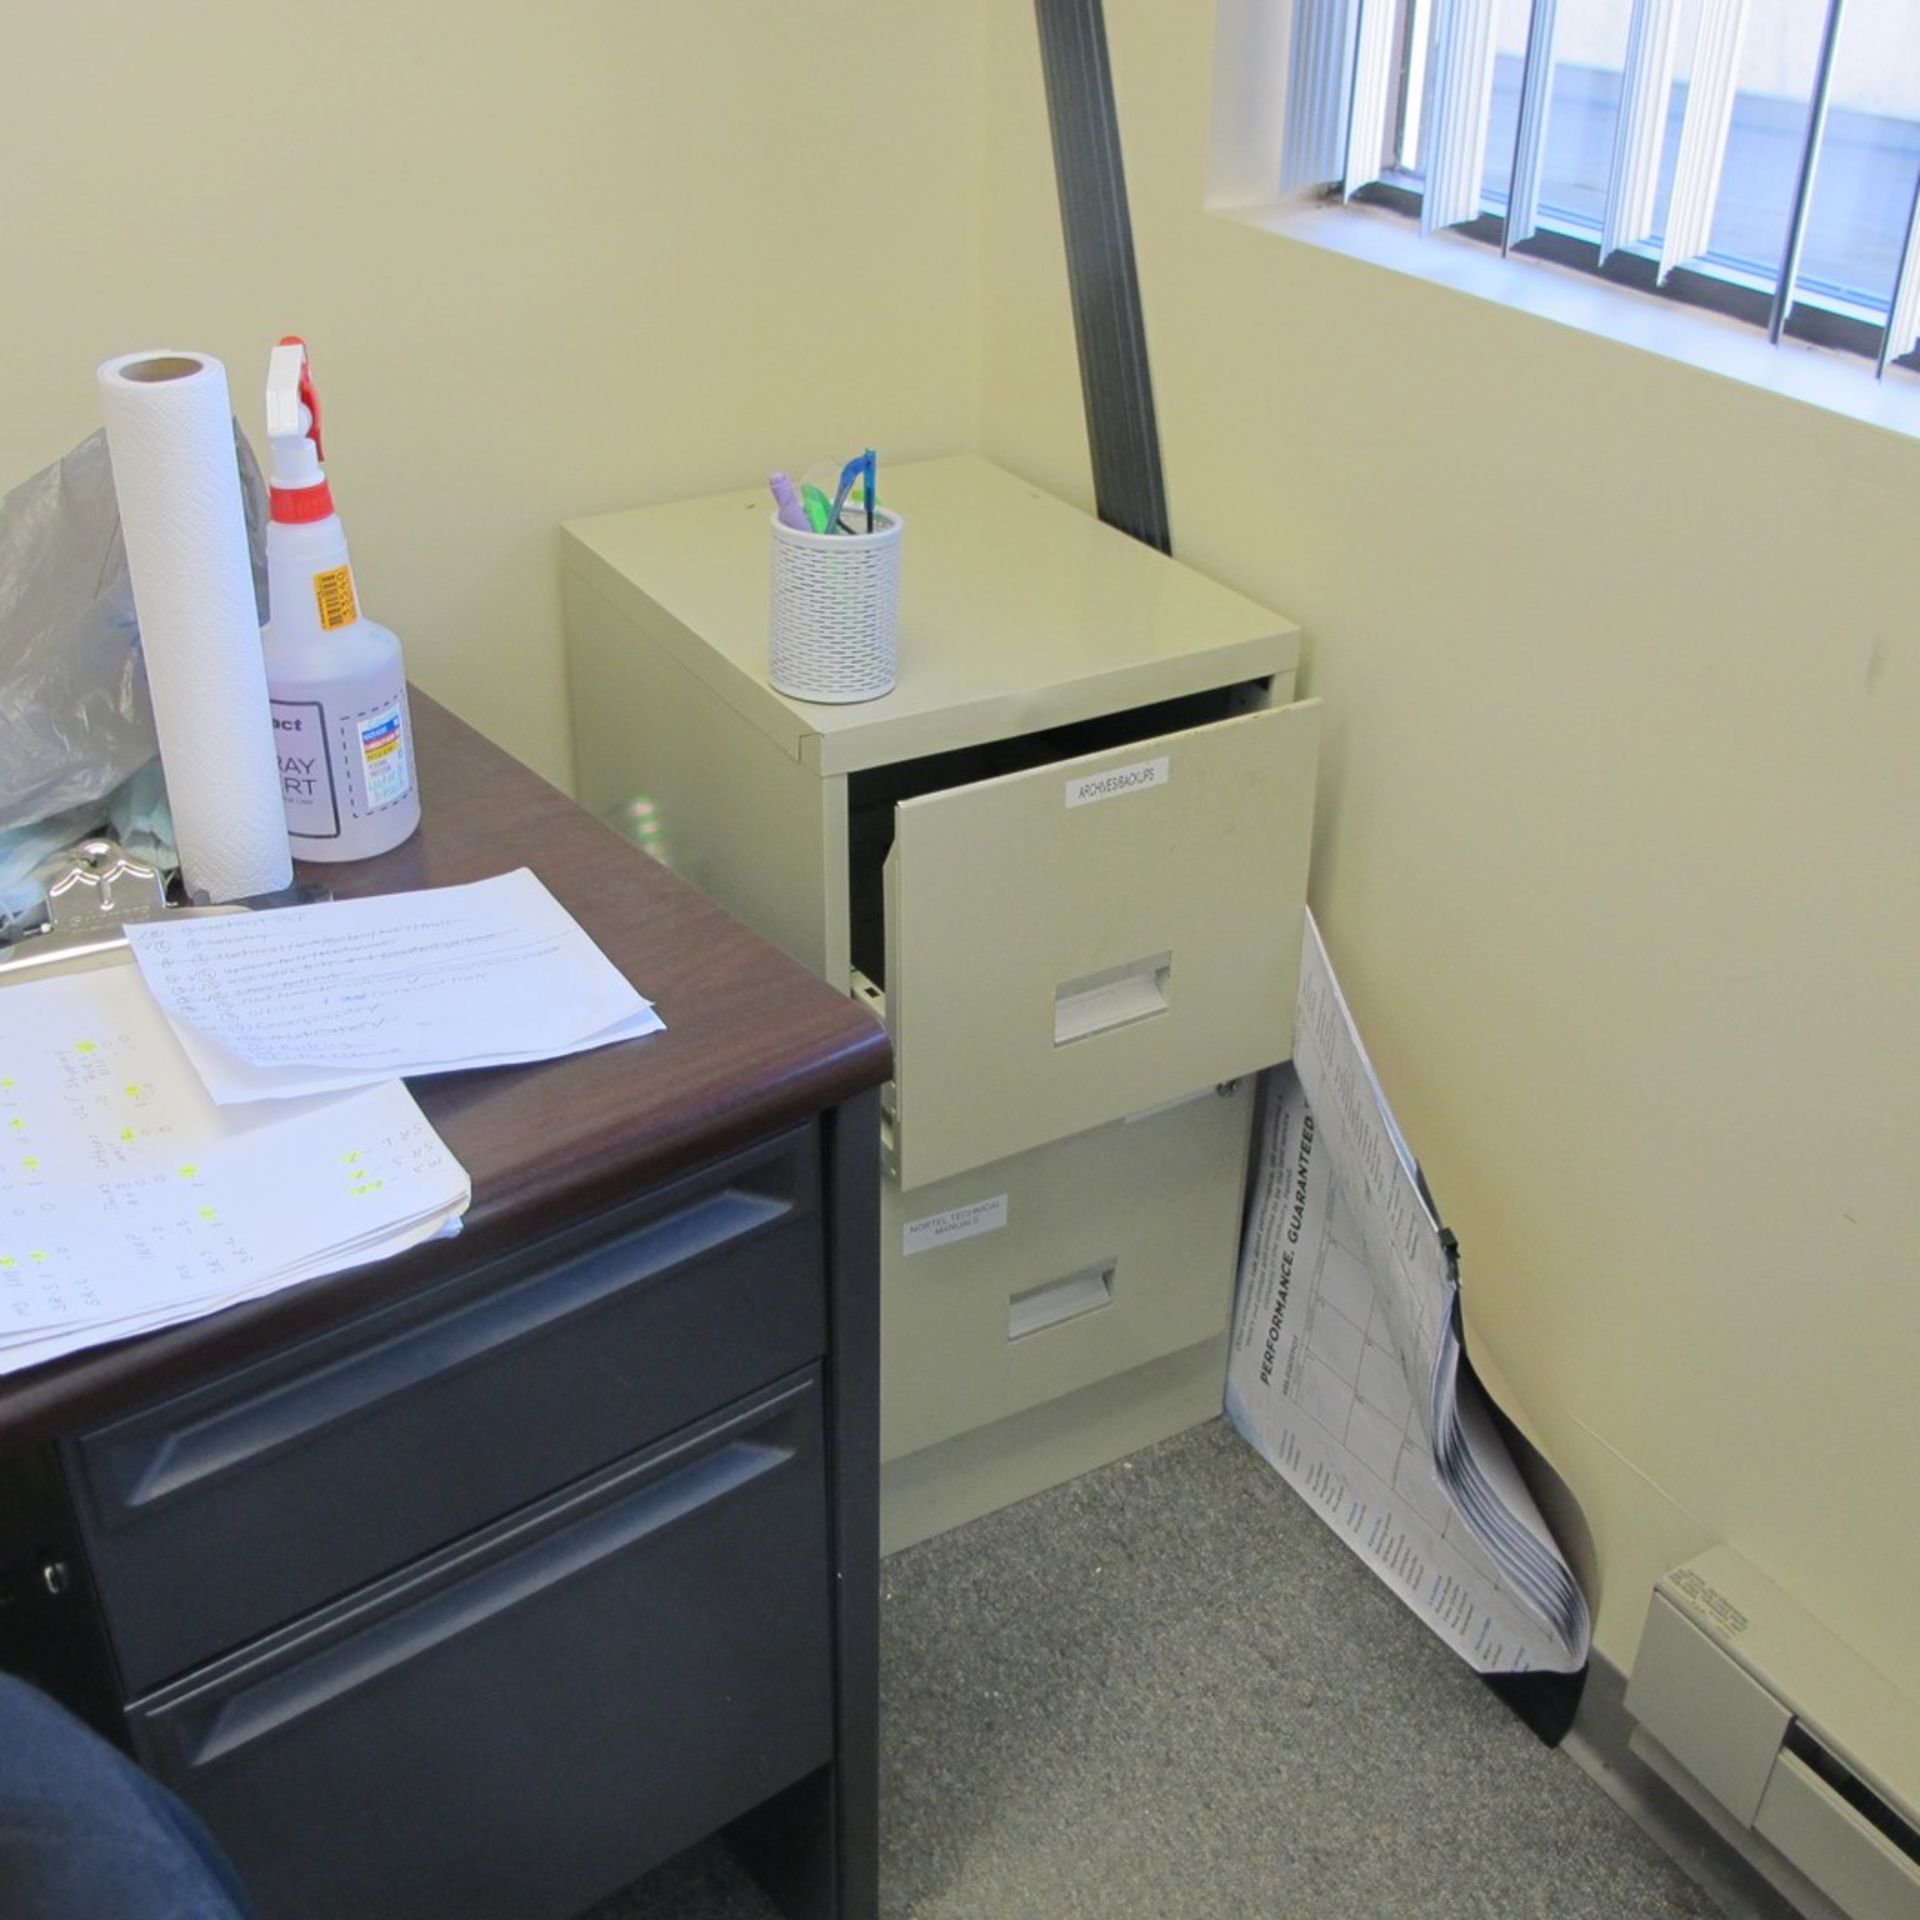 FILE CABINET, DESK, CHAIR, FAN (NO CONTENTS) (UPPER OFFICES) - Image 2 of 3